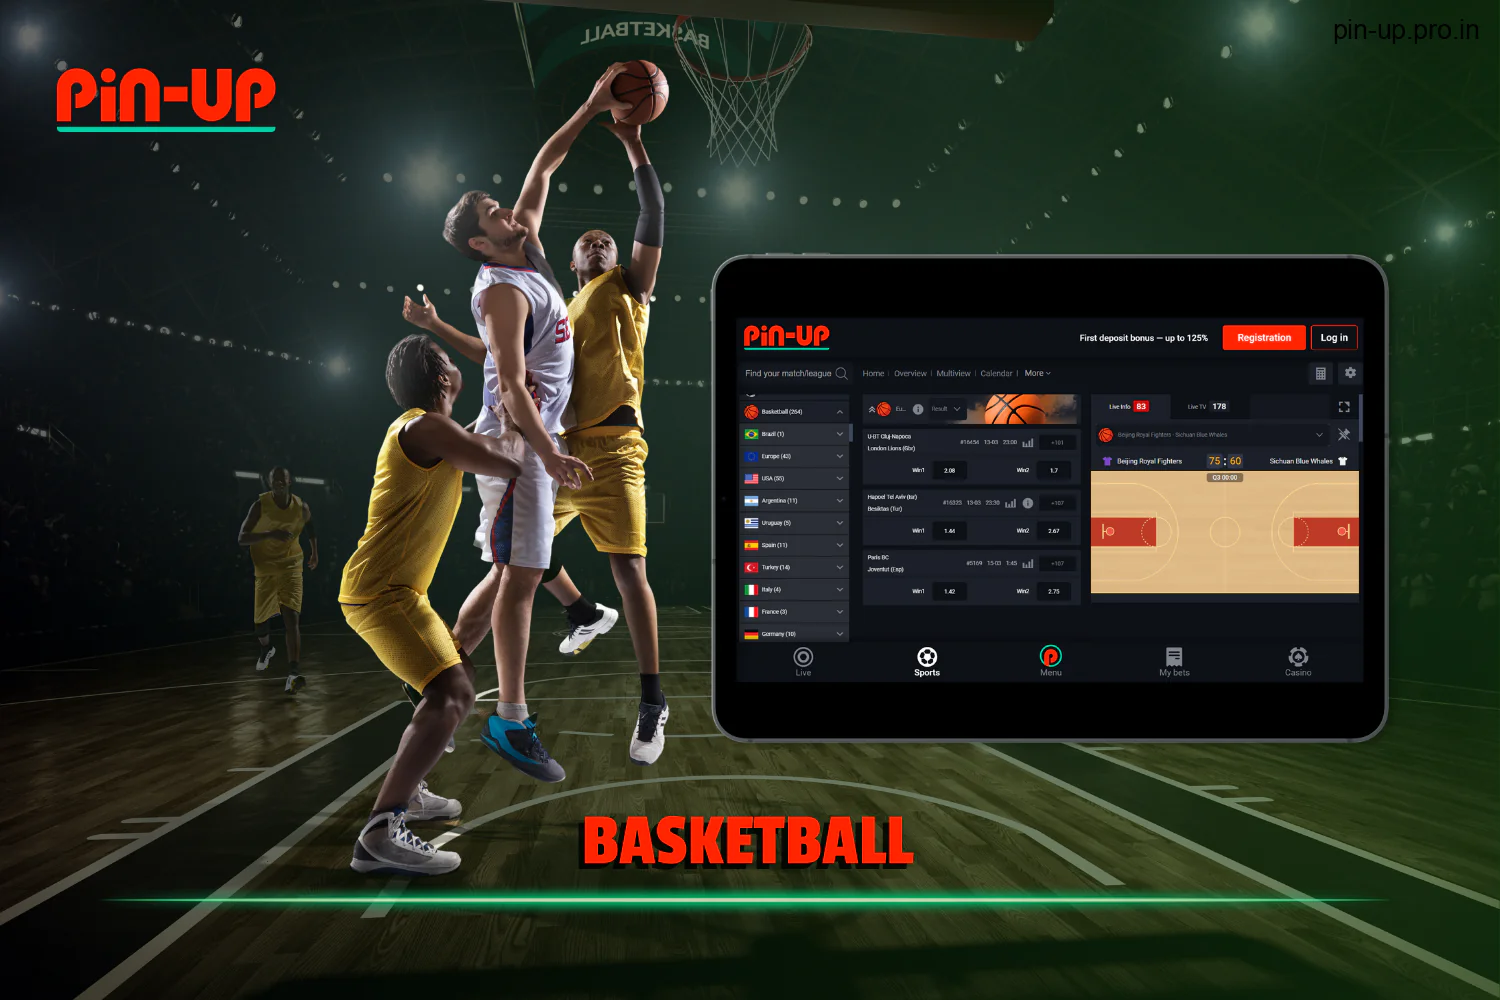 Users from India can engage in betting on basketball matches through PinUp.